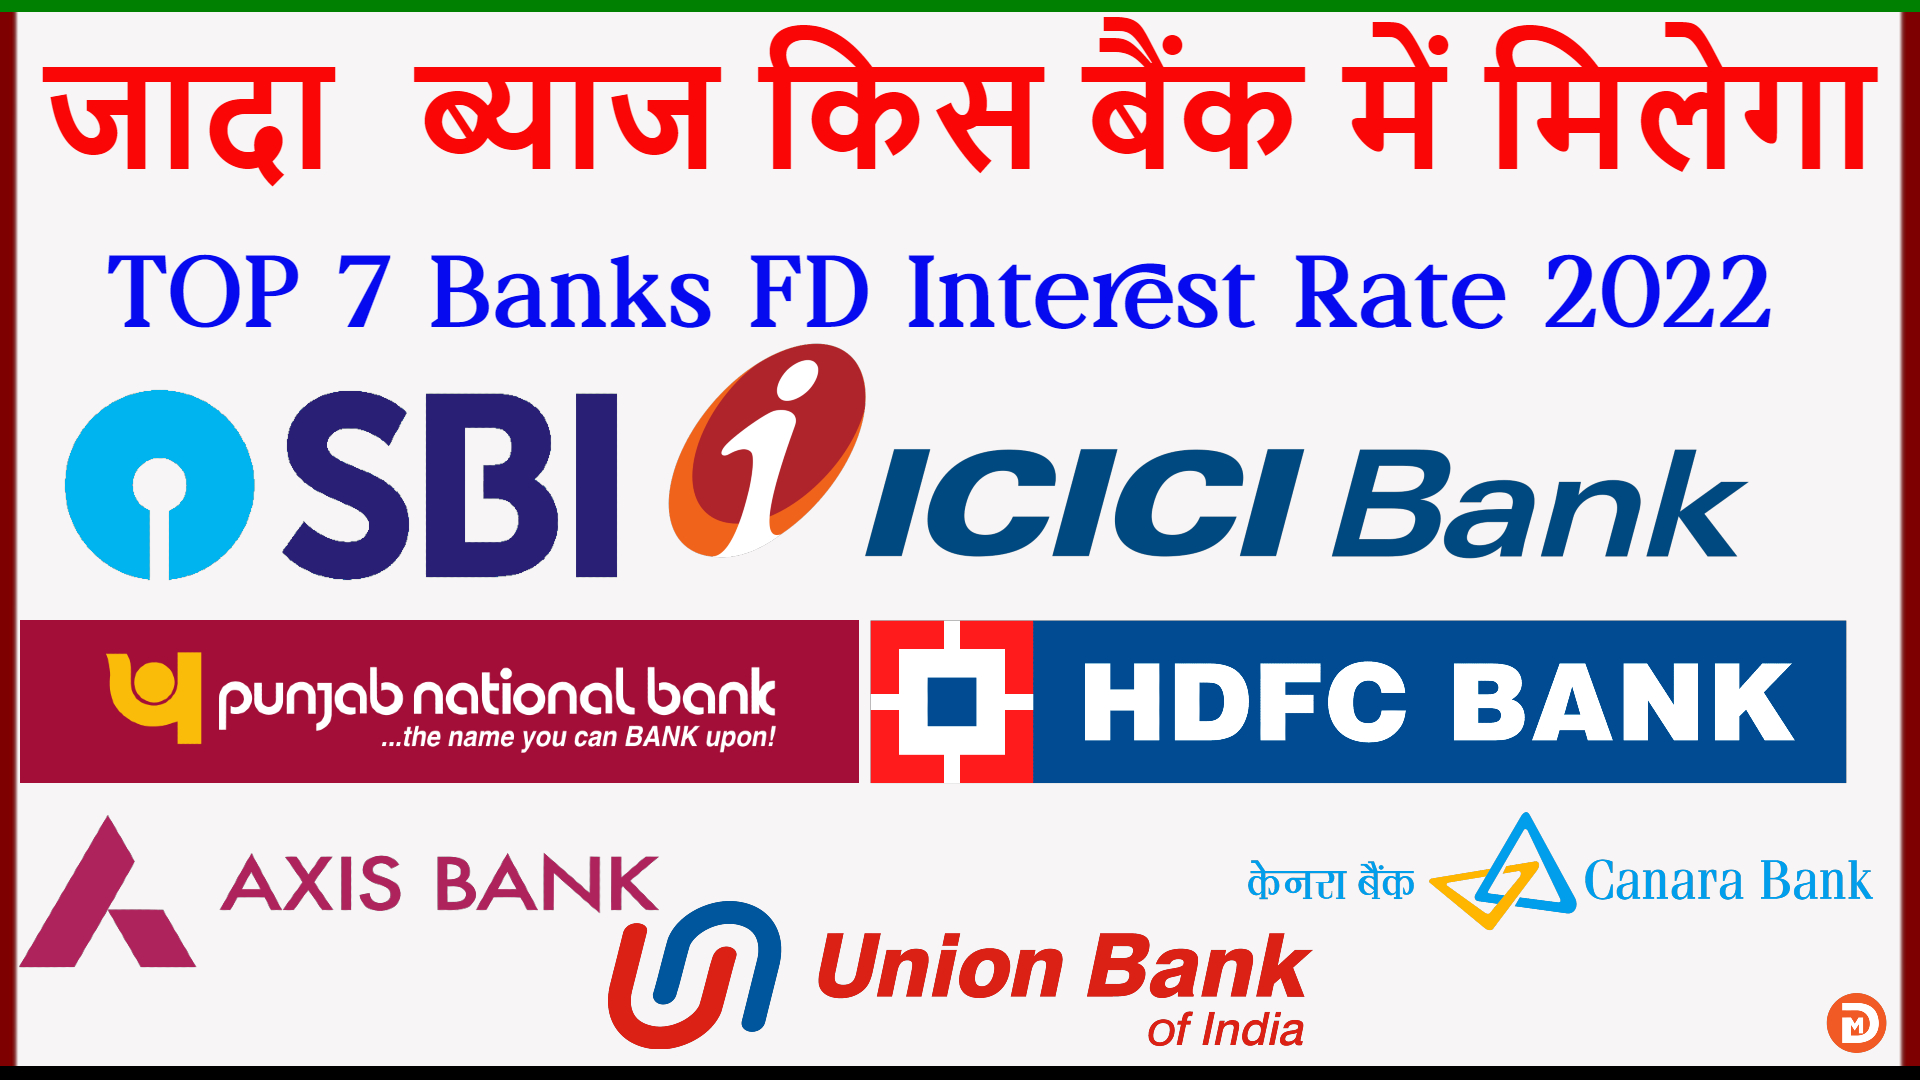 Which Bank Has The Highest interest Rate For Fixed Deposit?